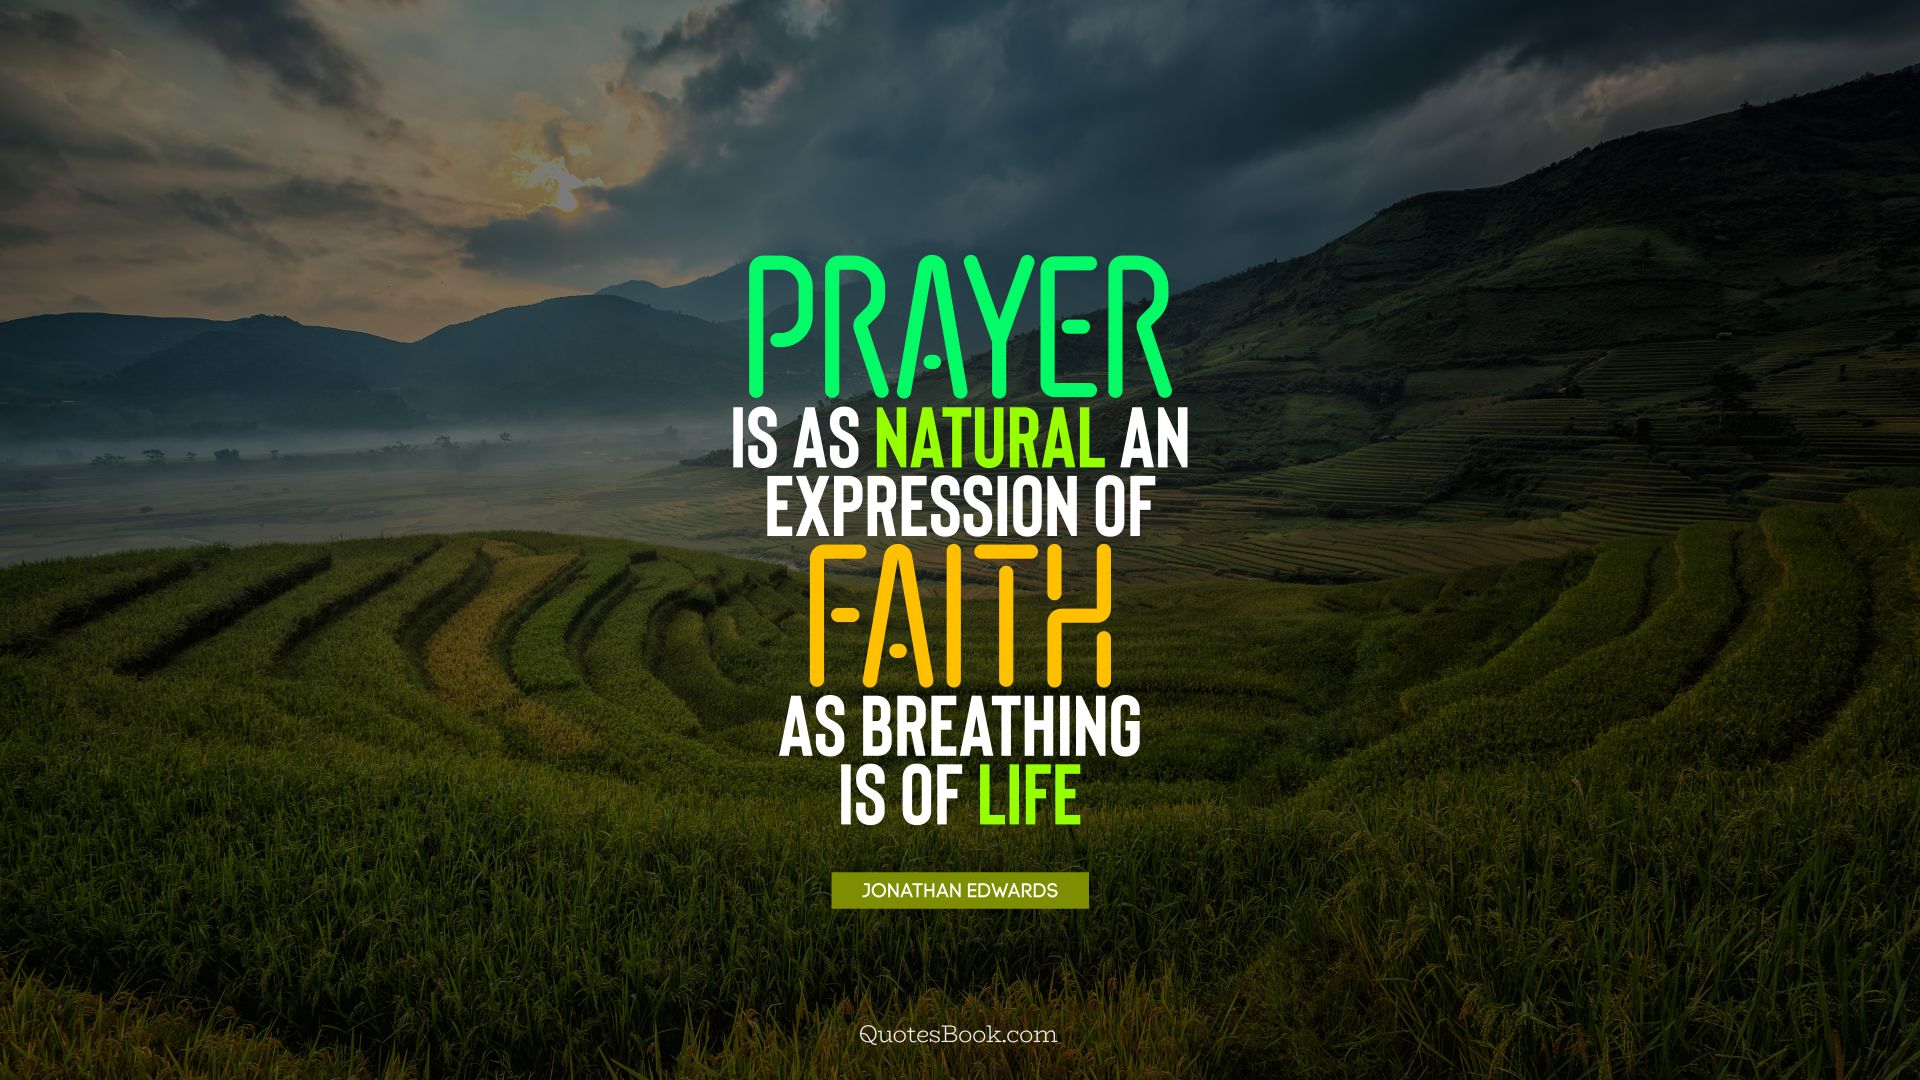 Prayer is as natural an expression of faith as breathing is of life. - Quote by Jonathan Edwards